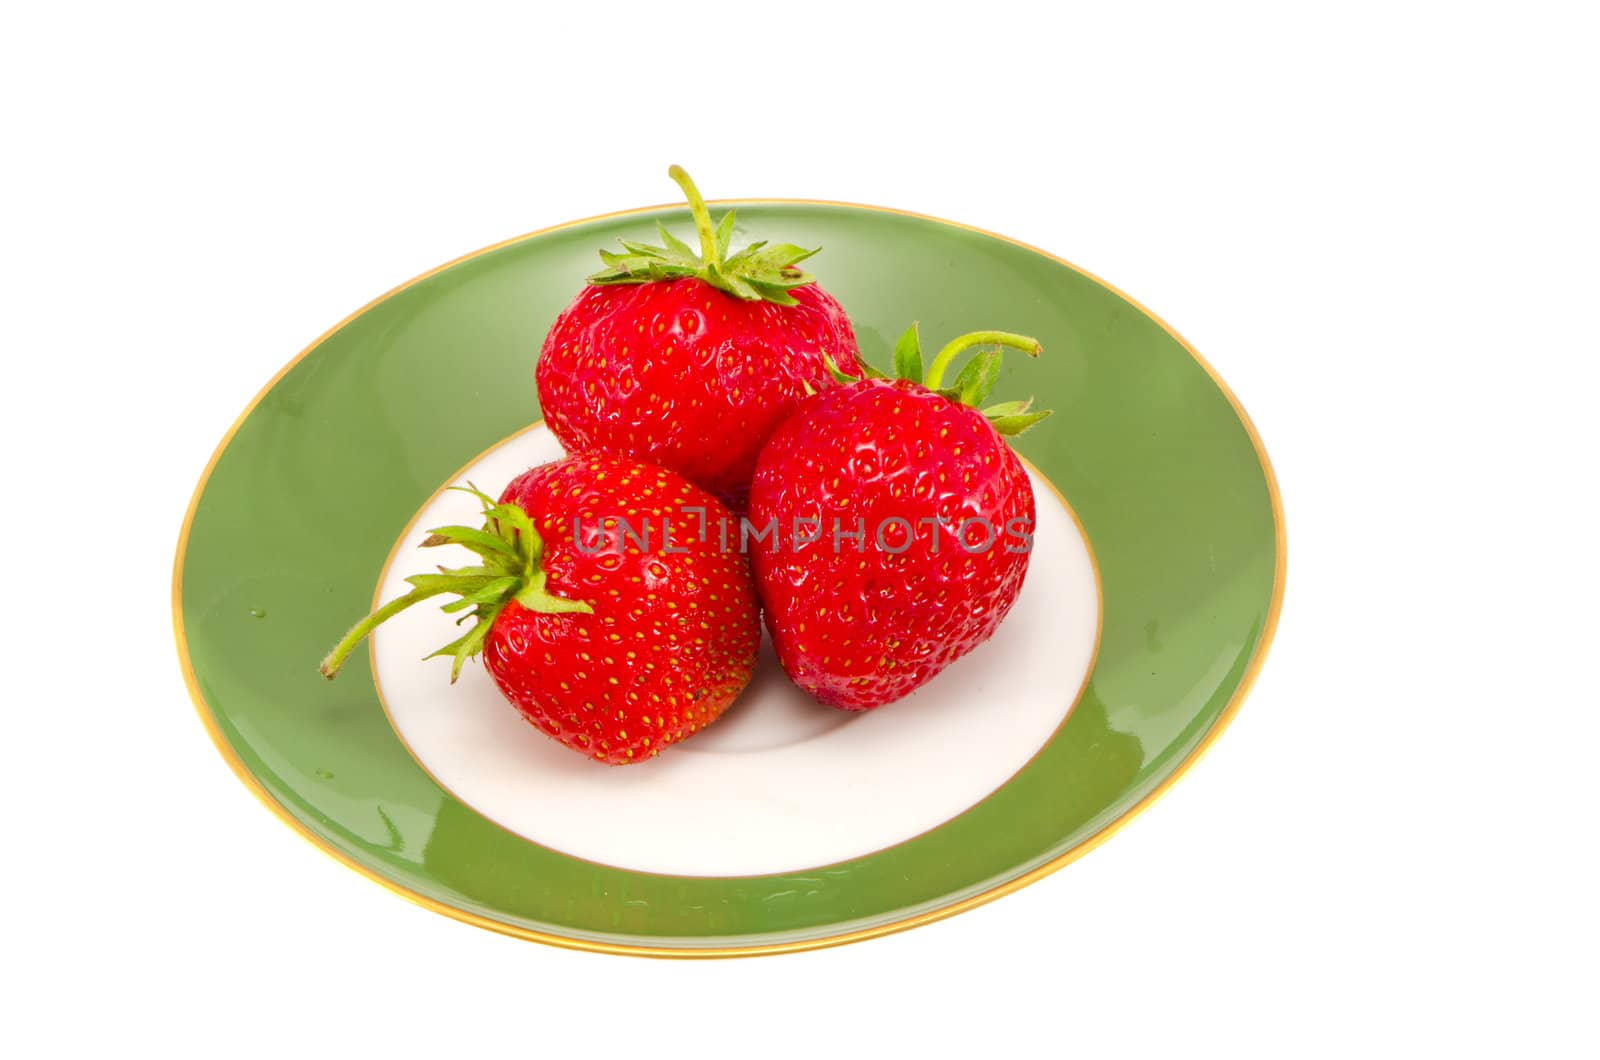 strawberries on the green plate isolated on white